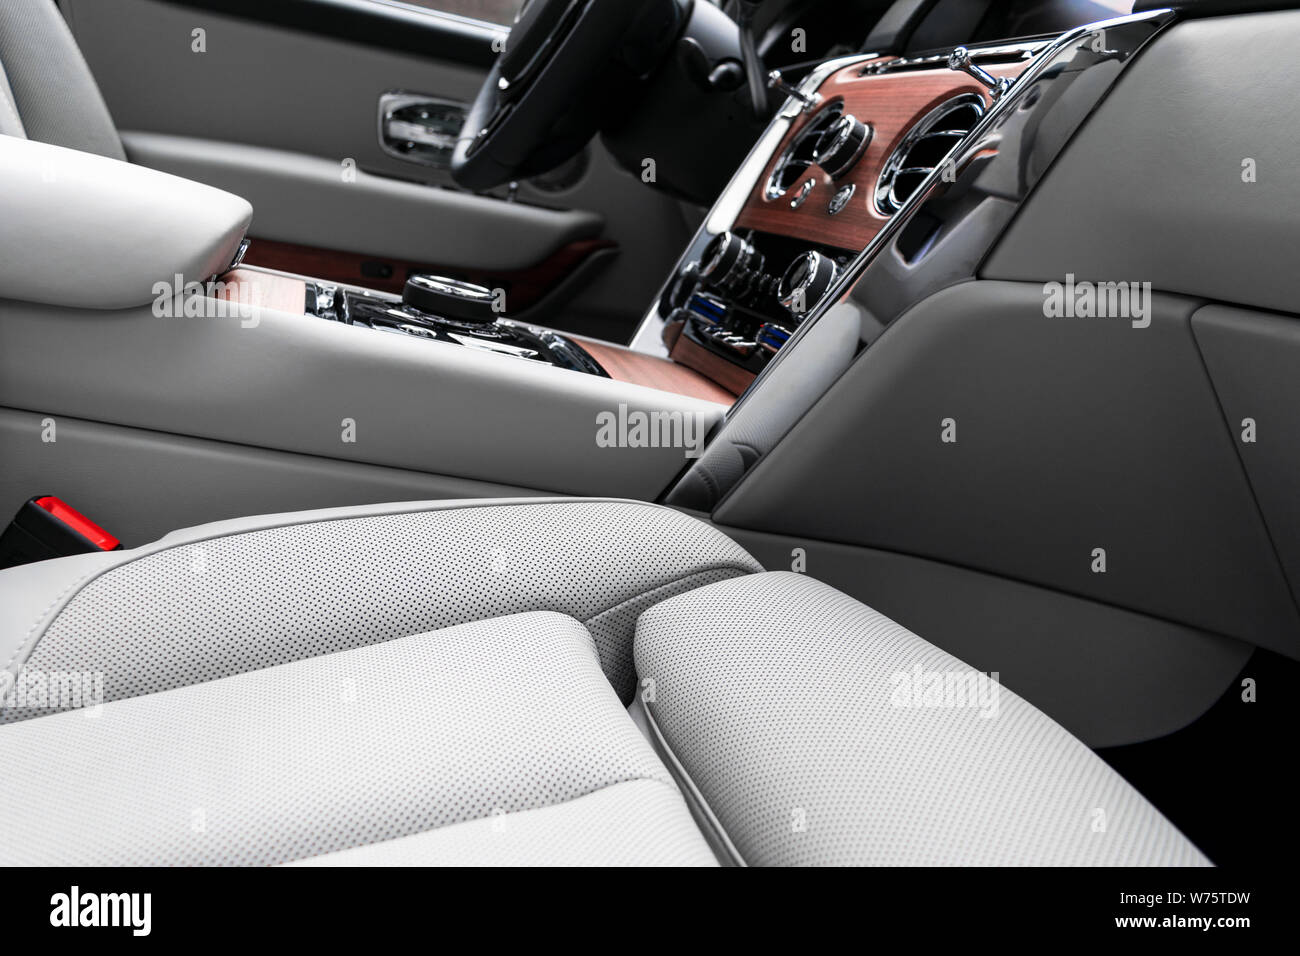 Modern luxury car white leather interior with natural wood panel. Part of leather car seat details with stitching. Interior of prestige modern car. Wh Stock Photo